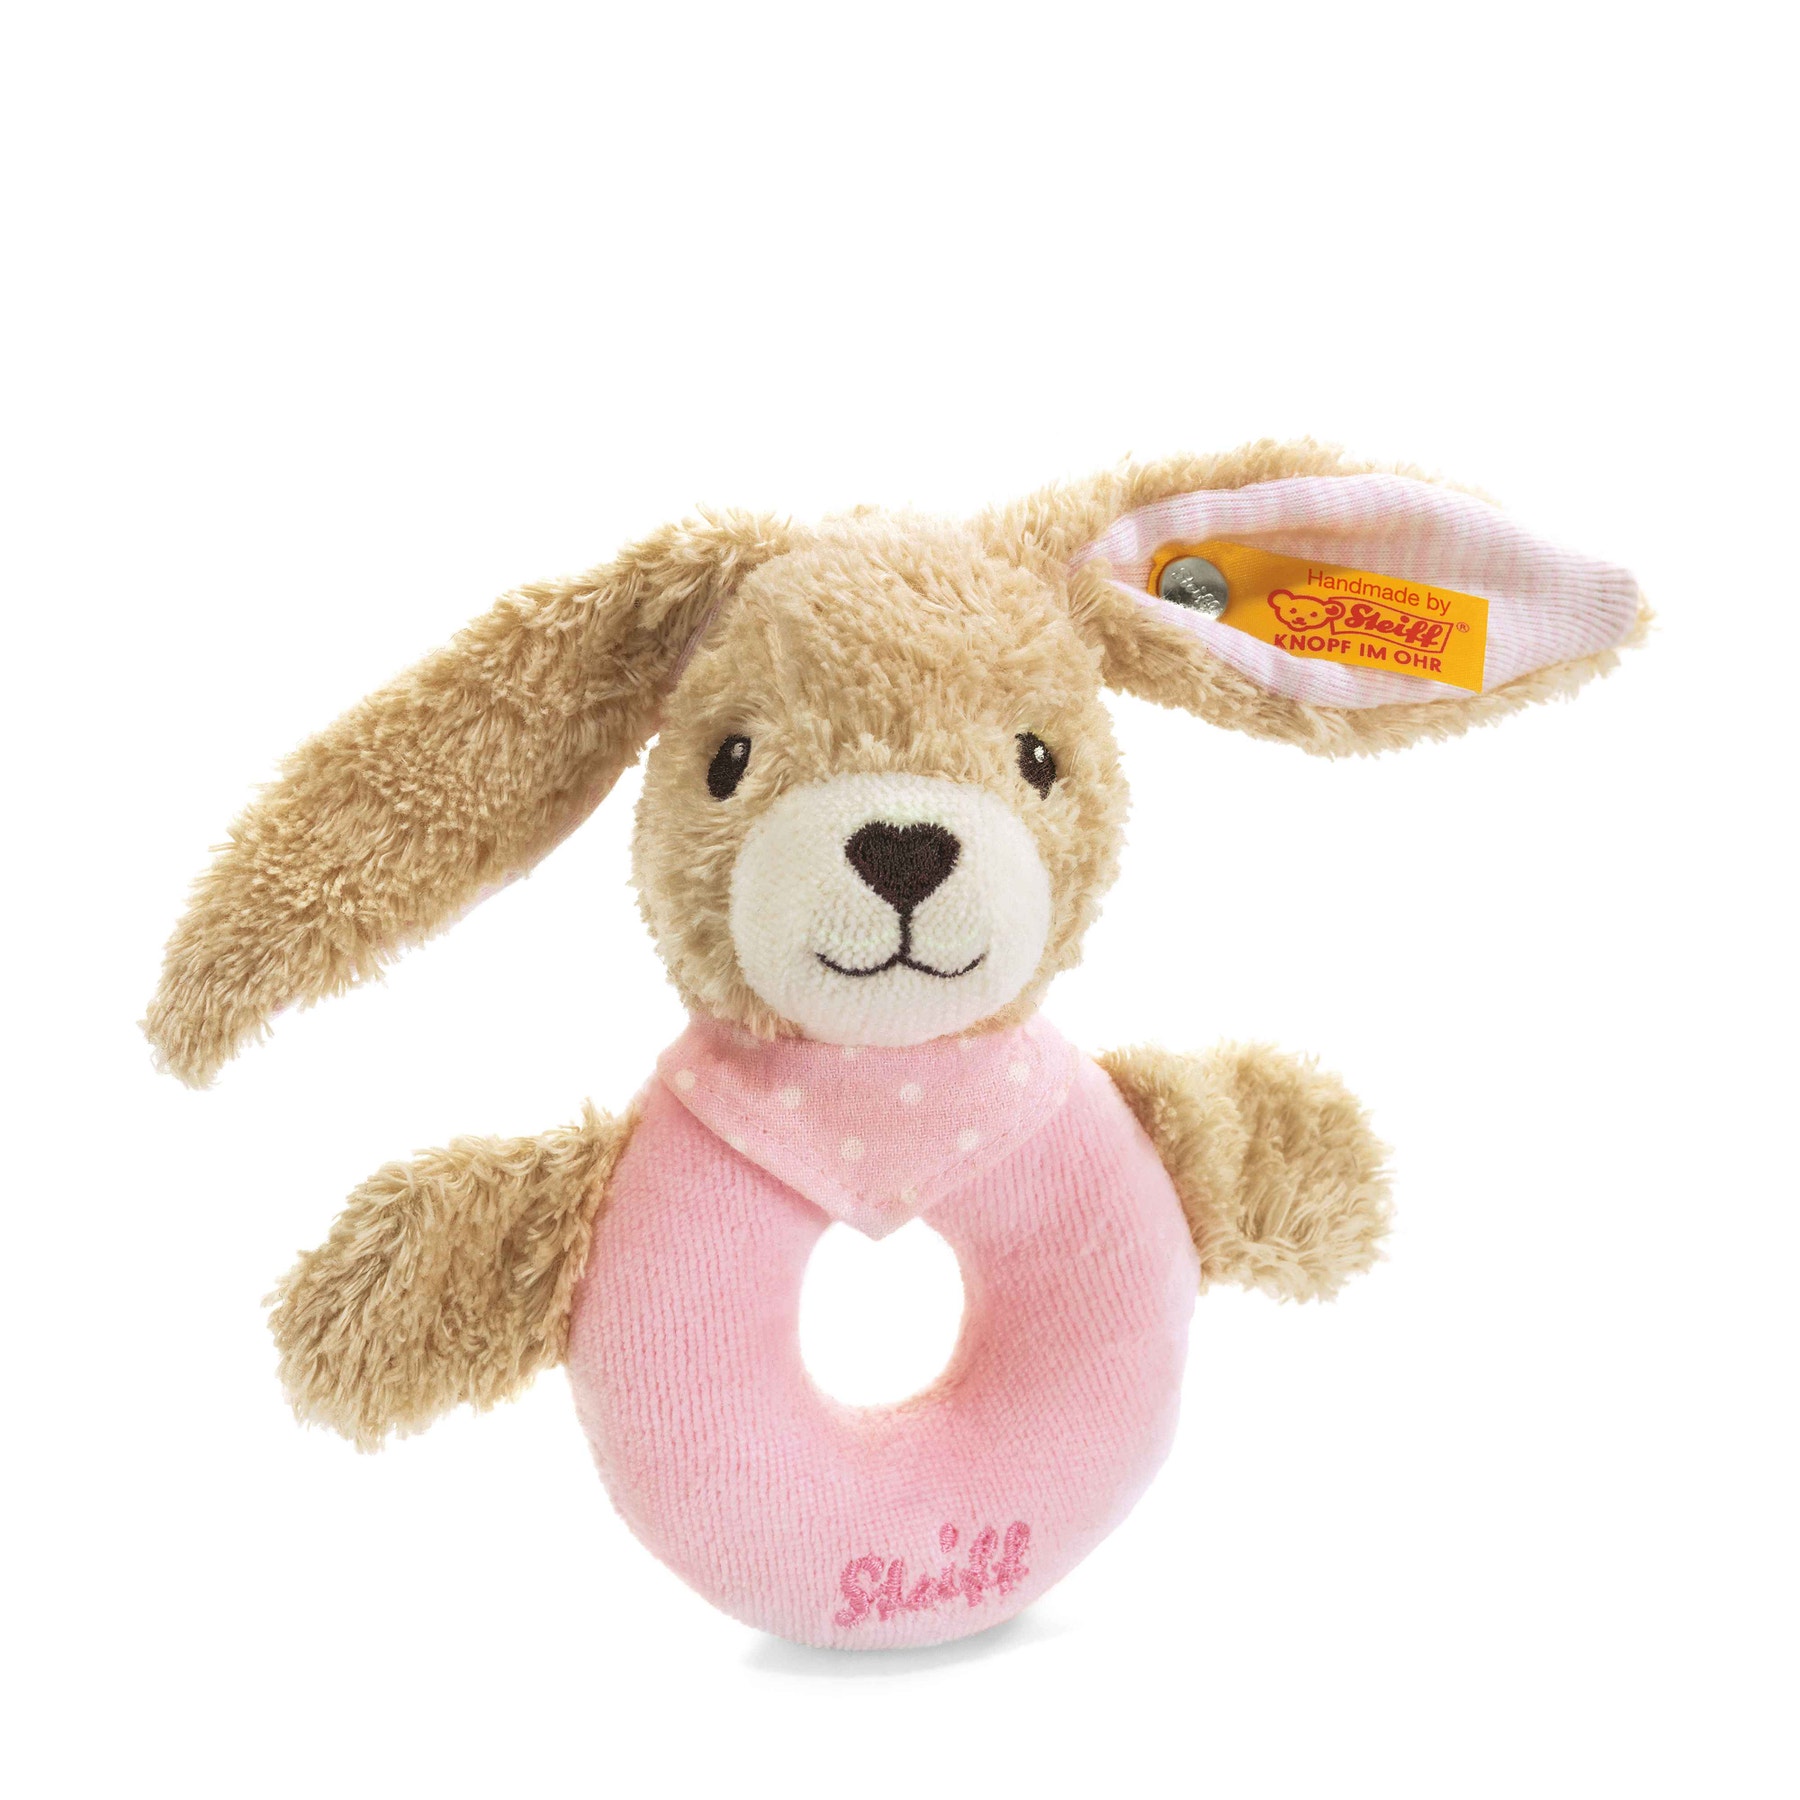 Hoppel rabbit grip toy with rattle